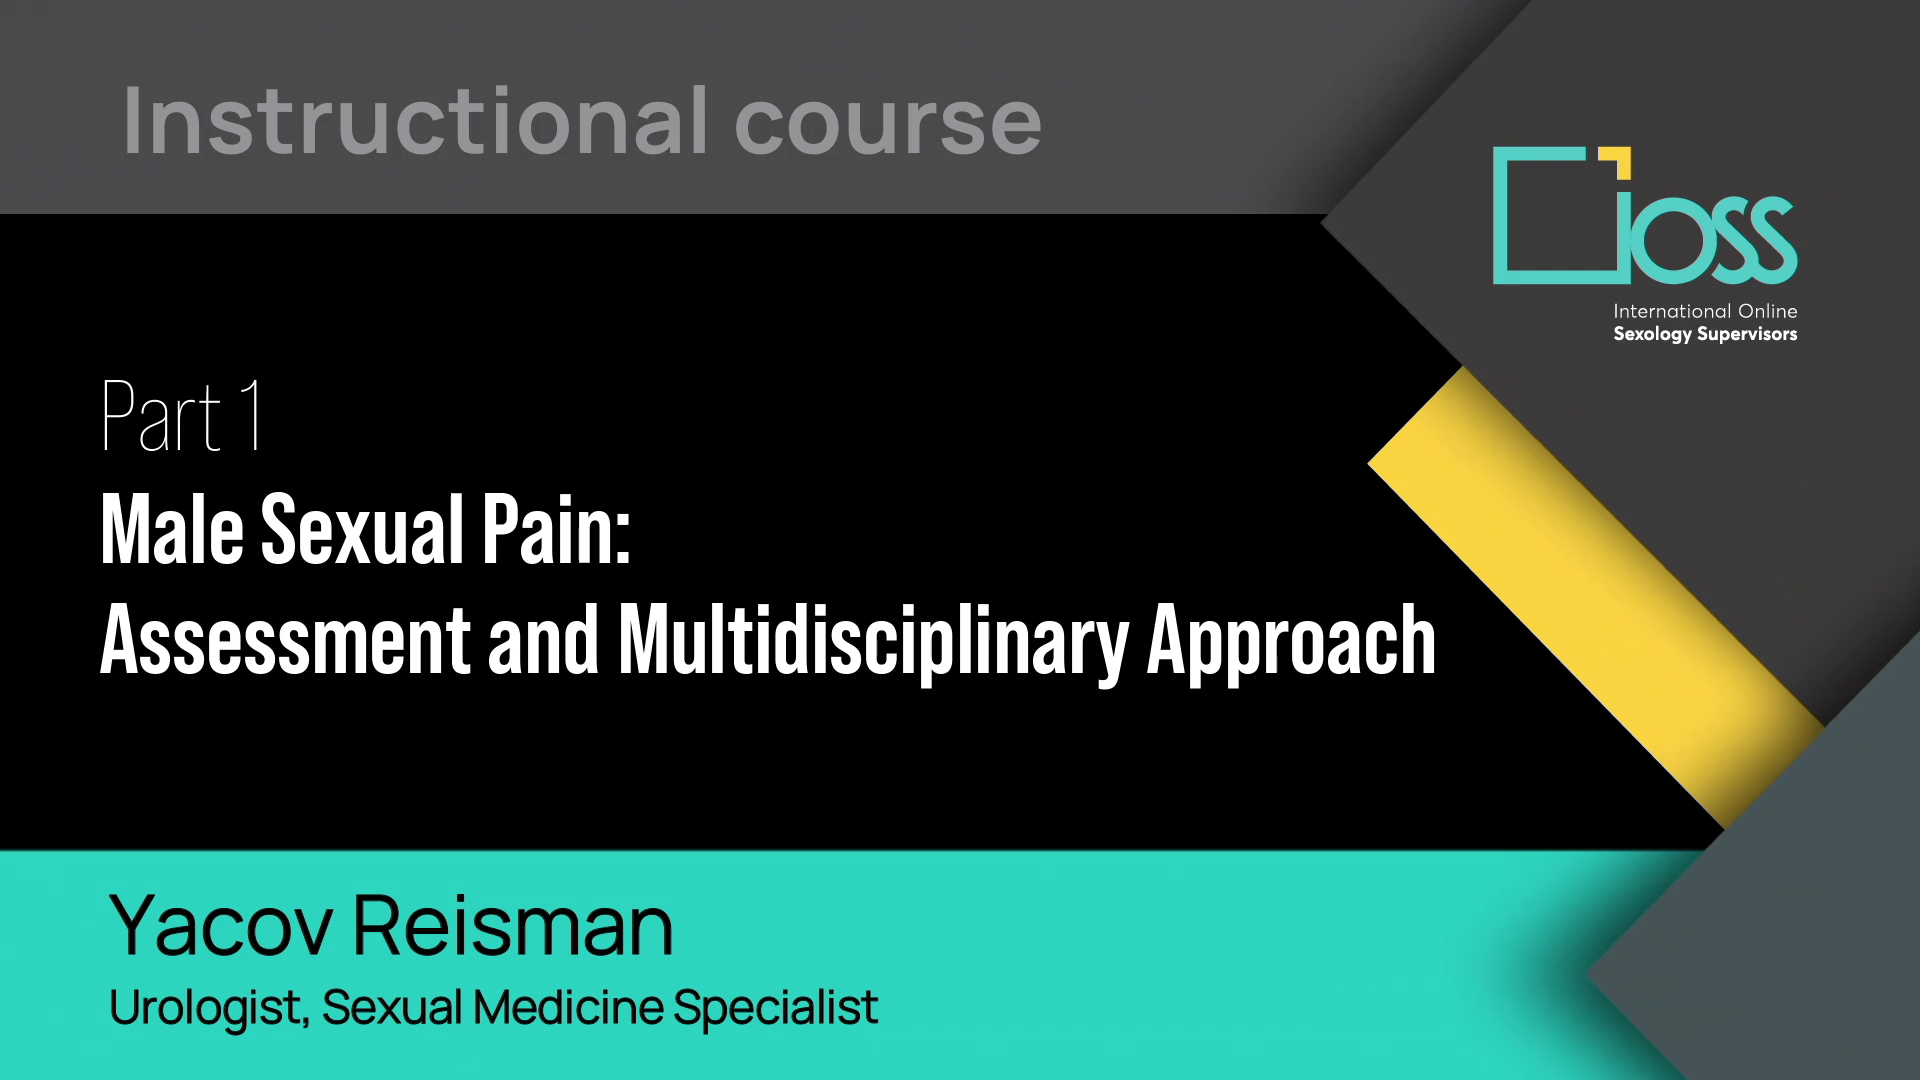 Part 1 Male Sexual Pain: Assessment and Multidisciplinary Approach (Part 1 & 2)